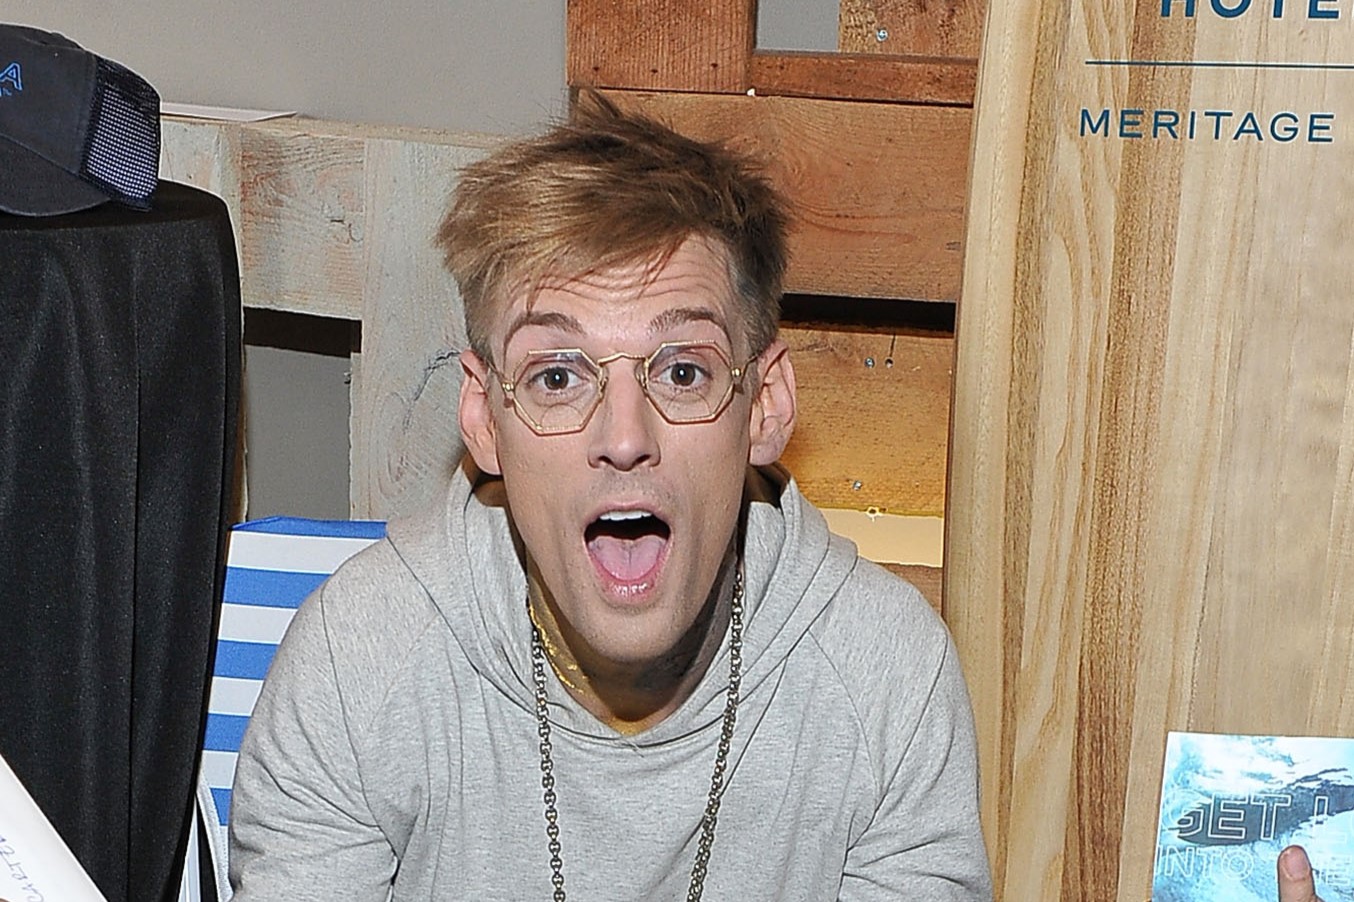 Did Aaron Carter Leave a Suicide Letter? Family, Fans Already Worried About Singer's Well-Being Days Before Passing